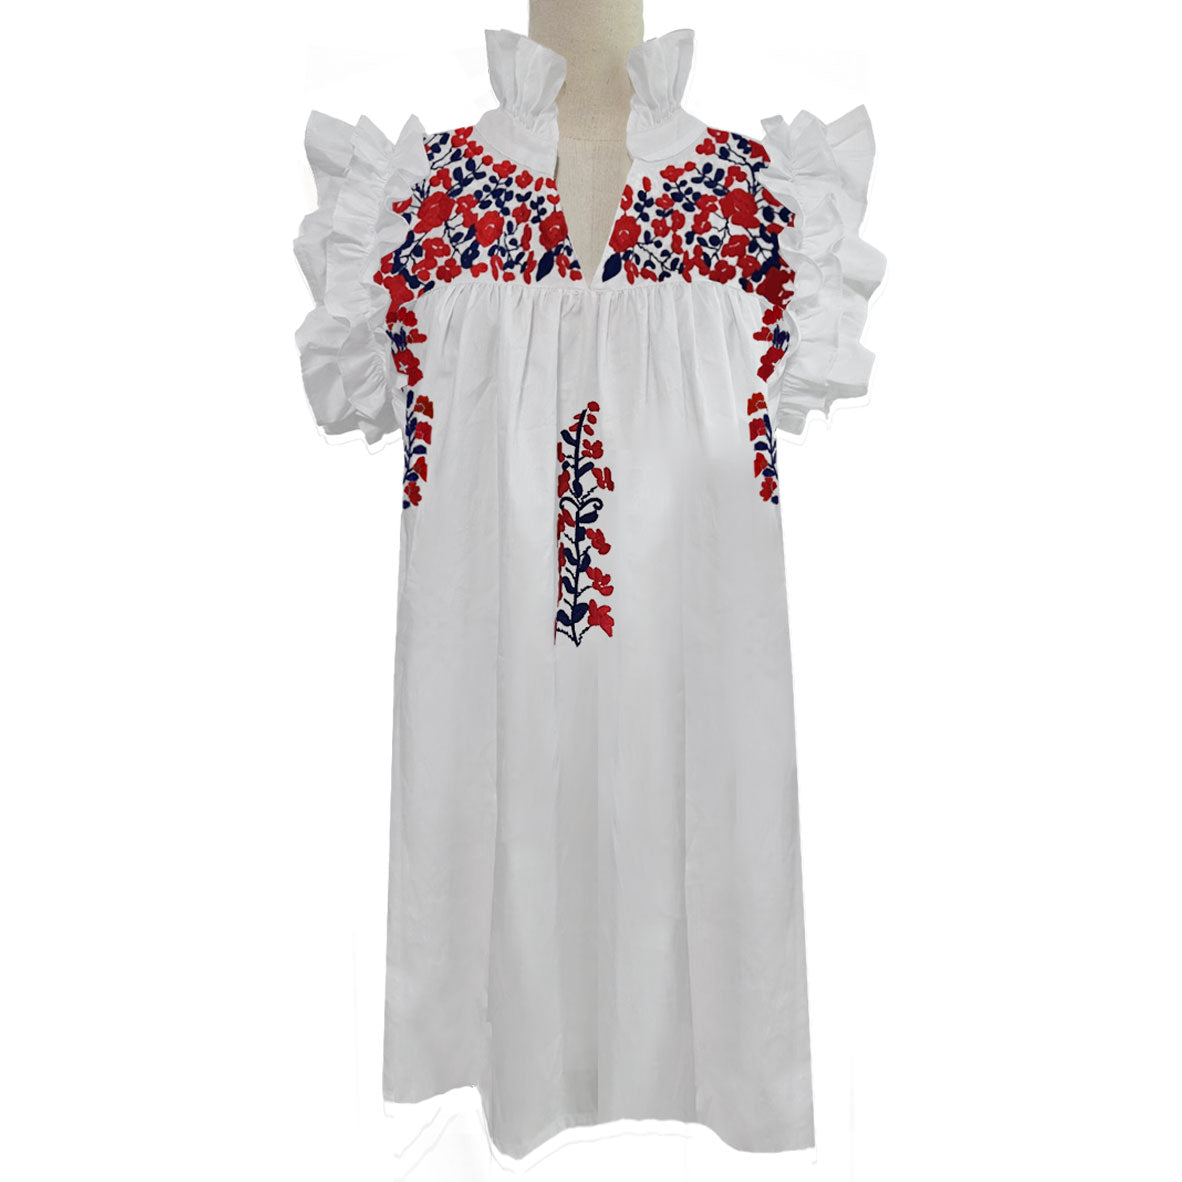 PRE-ORDER: Fourth of July White Hummingbird Dress (mid-June delivery)